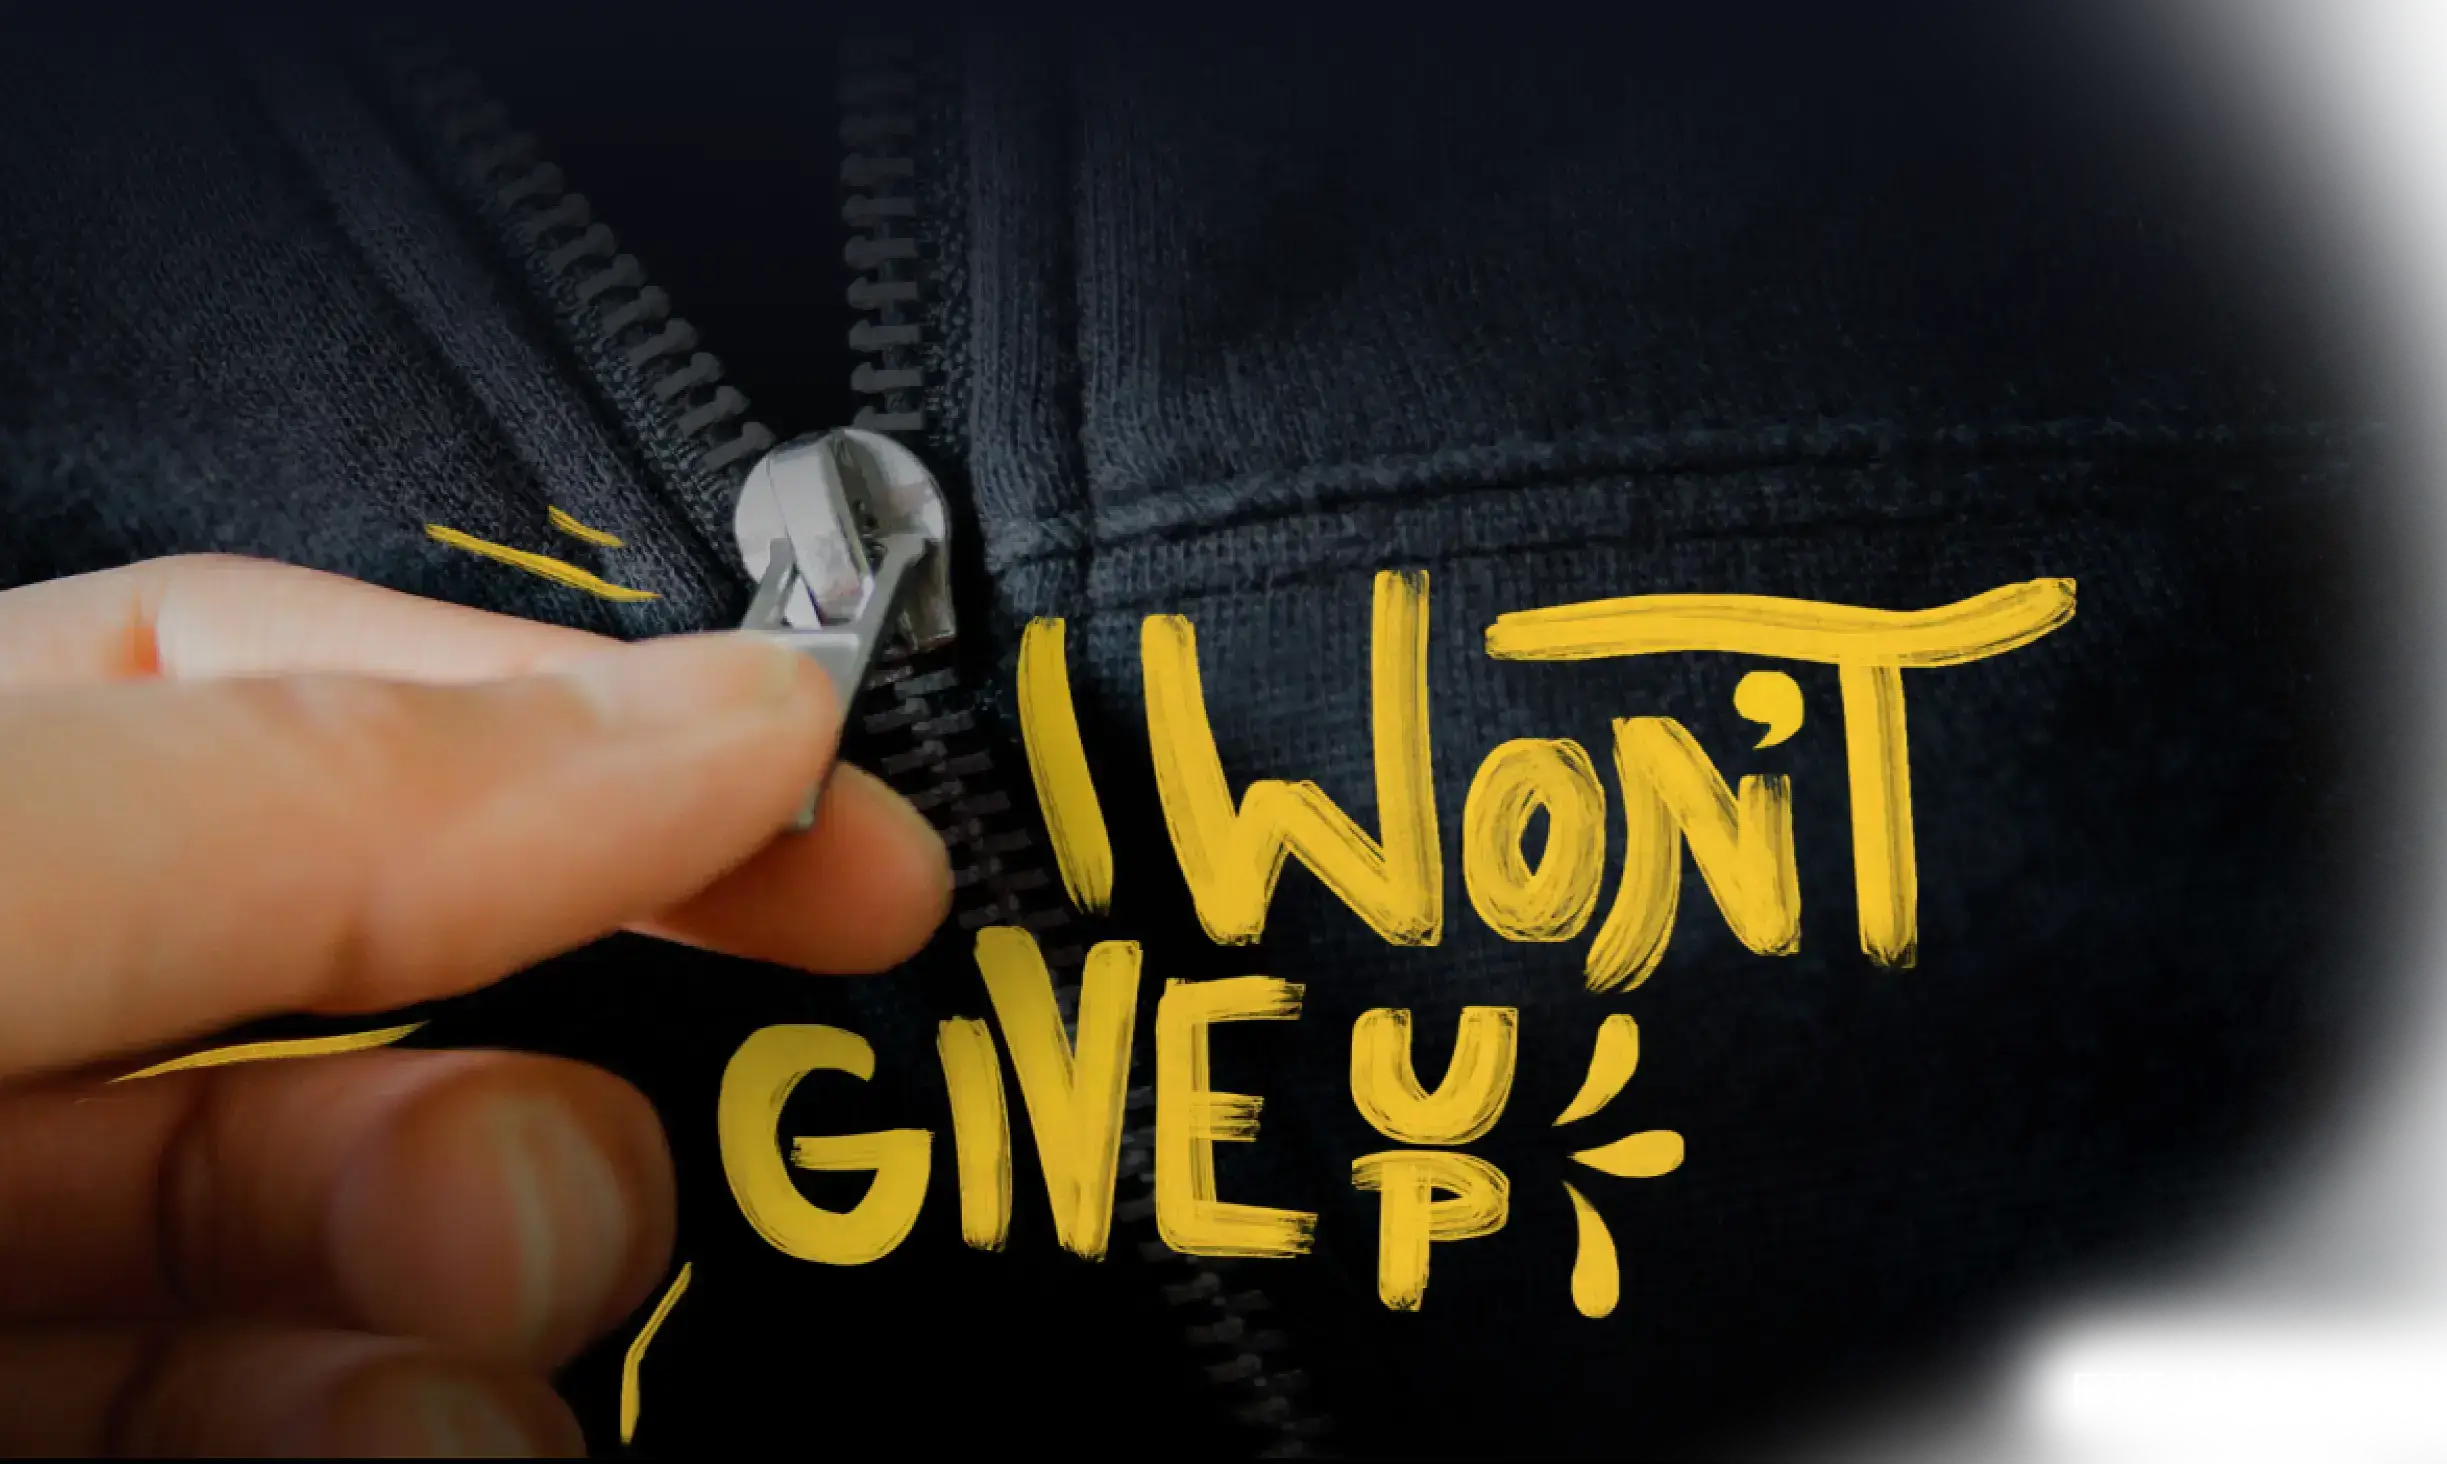 Someone zipping up a coat with the words "I won't give up" on the chest."